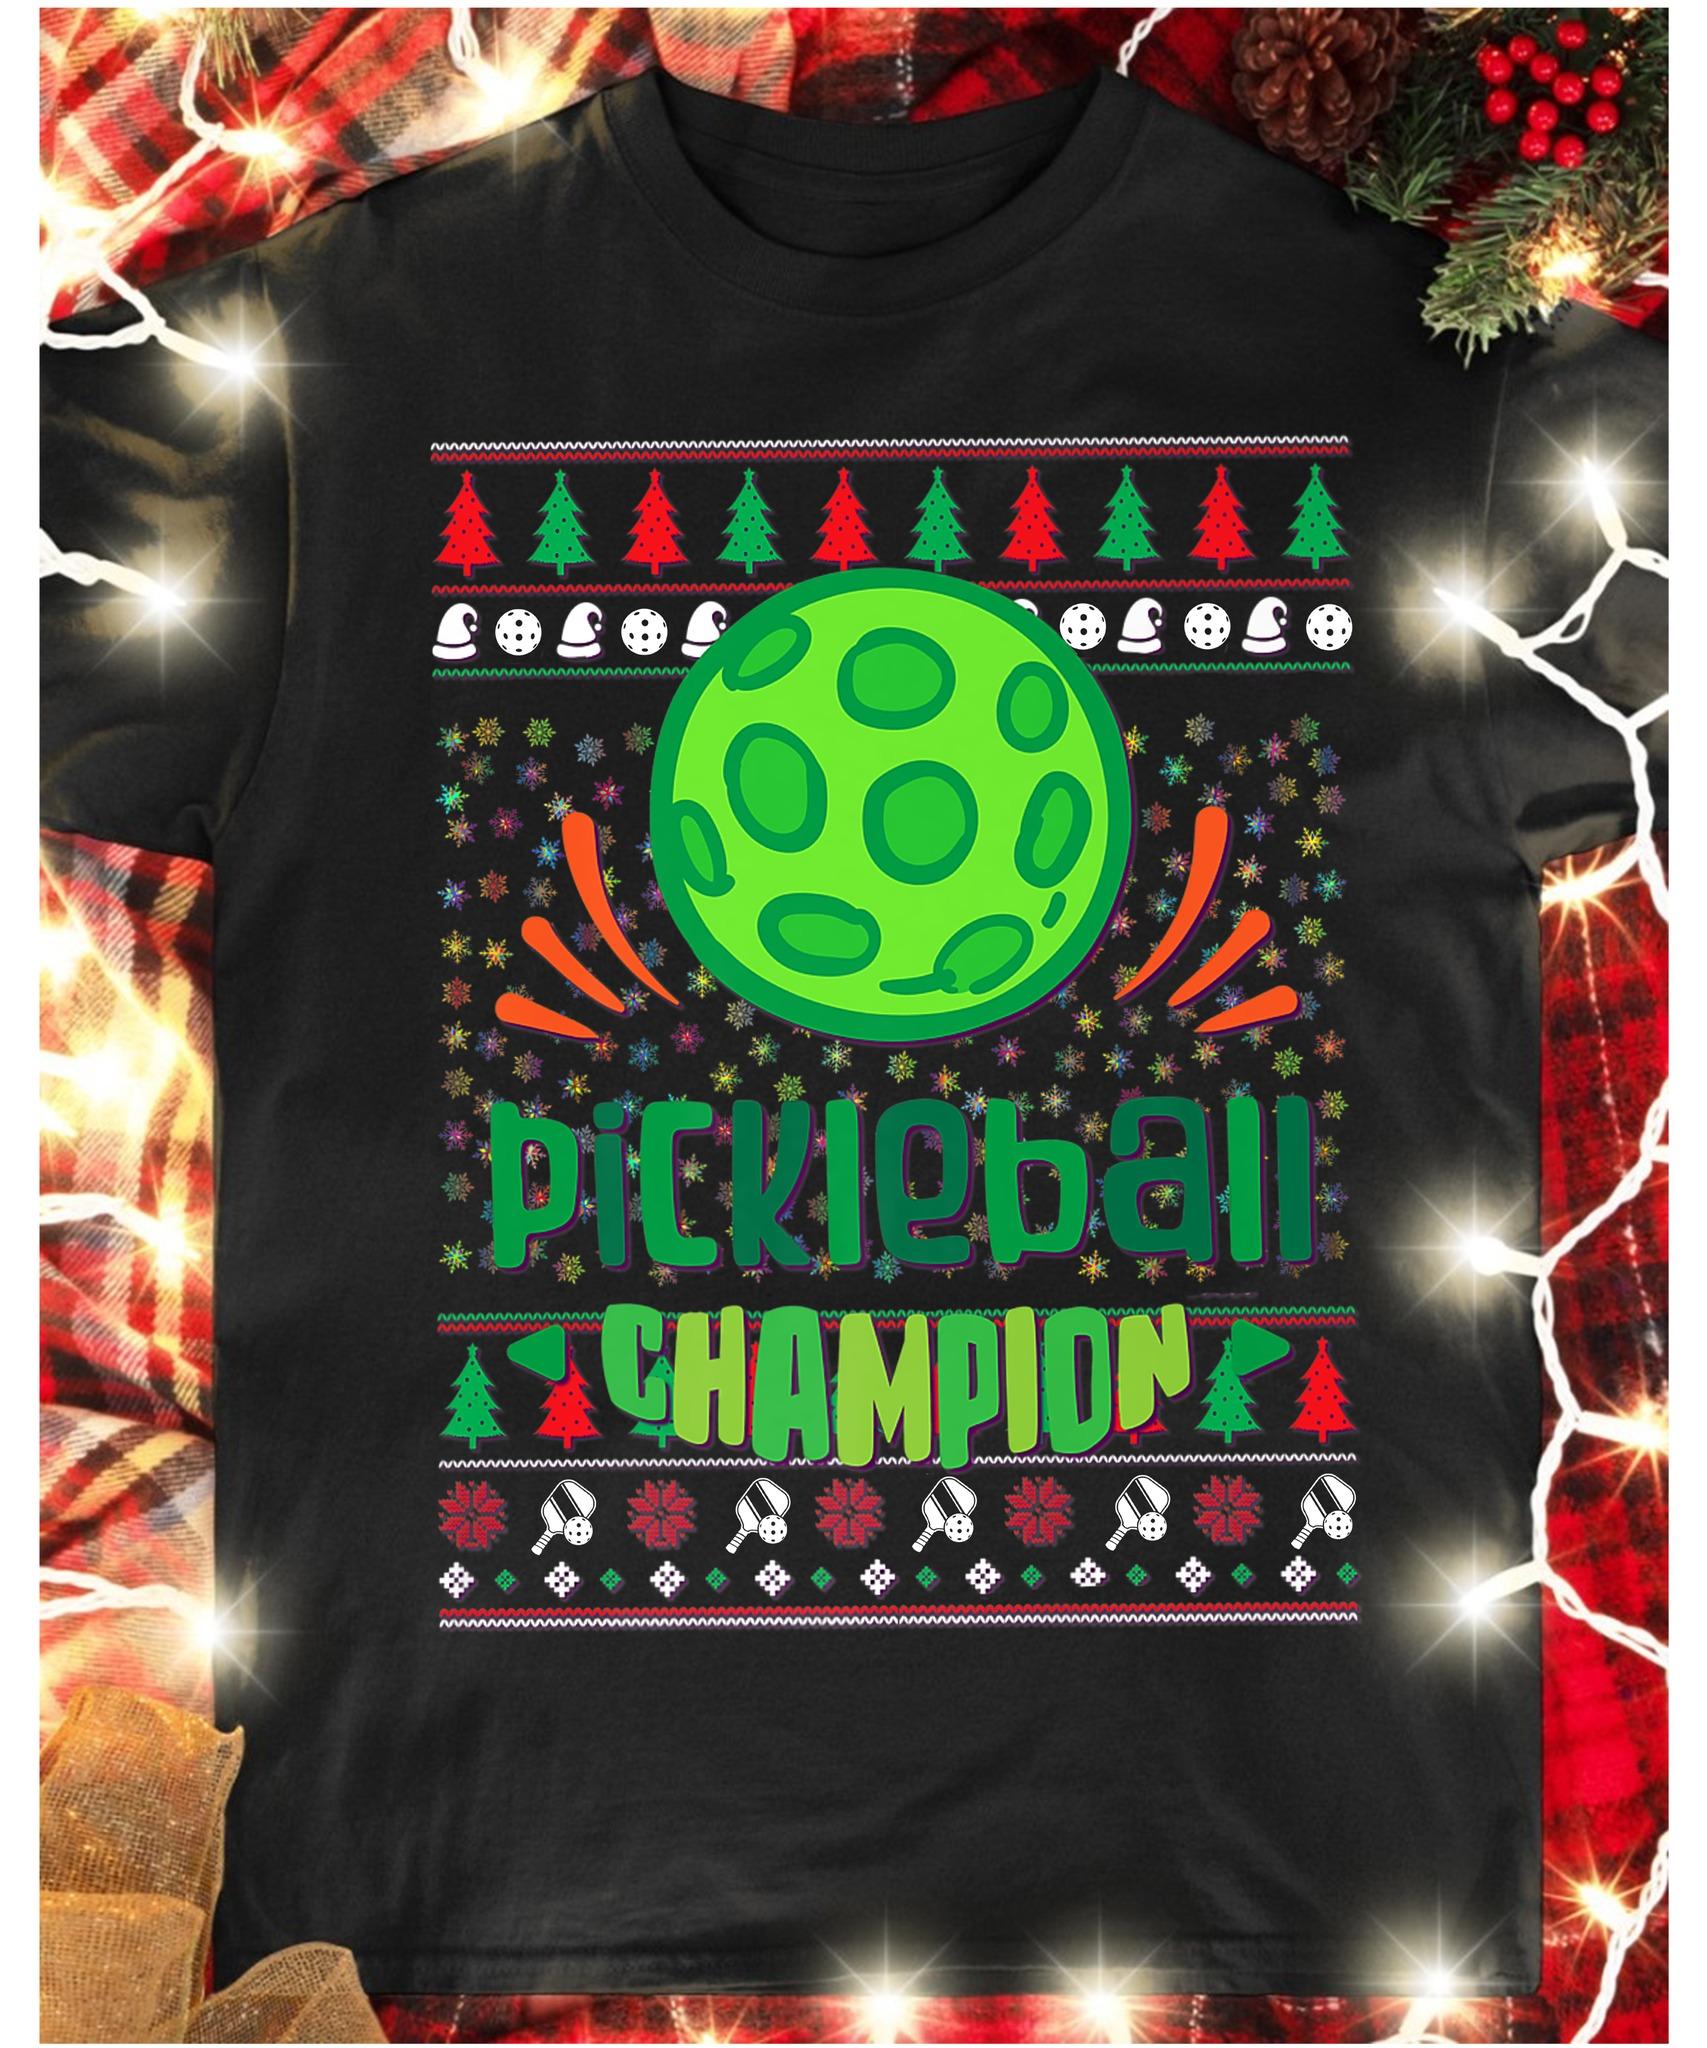 Pickleball champion - Pickleball player gift, Christmas day ugly sweater